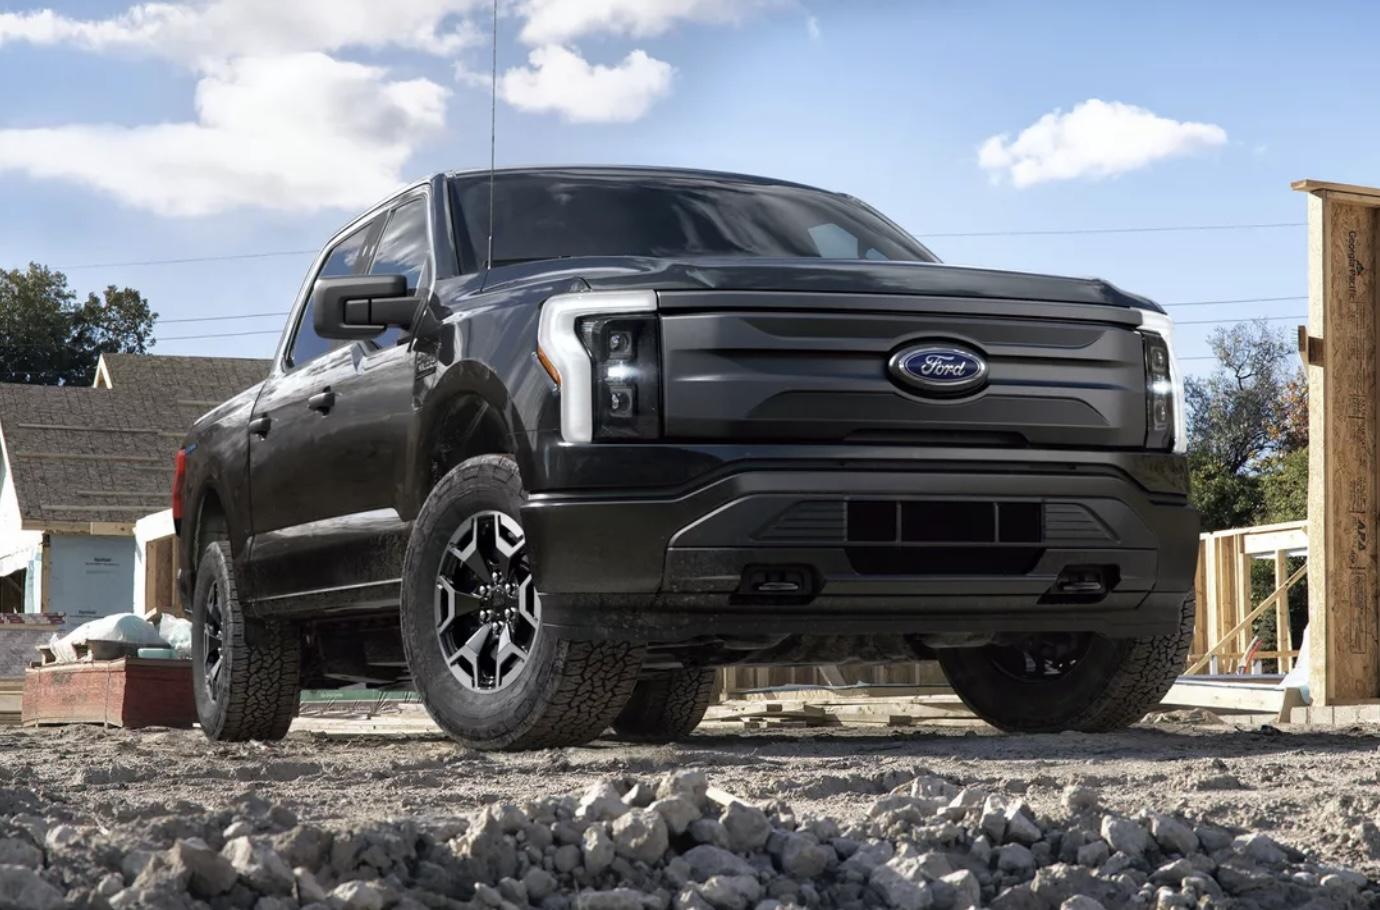 Ford F-150 Lightning Article: Why Ford's Electric 2022 F-150 Lightning is More Important Than You Think Screen Shot 2021-07-21 at 5.23.57 PM